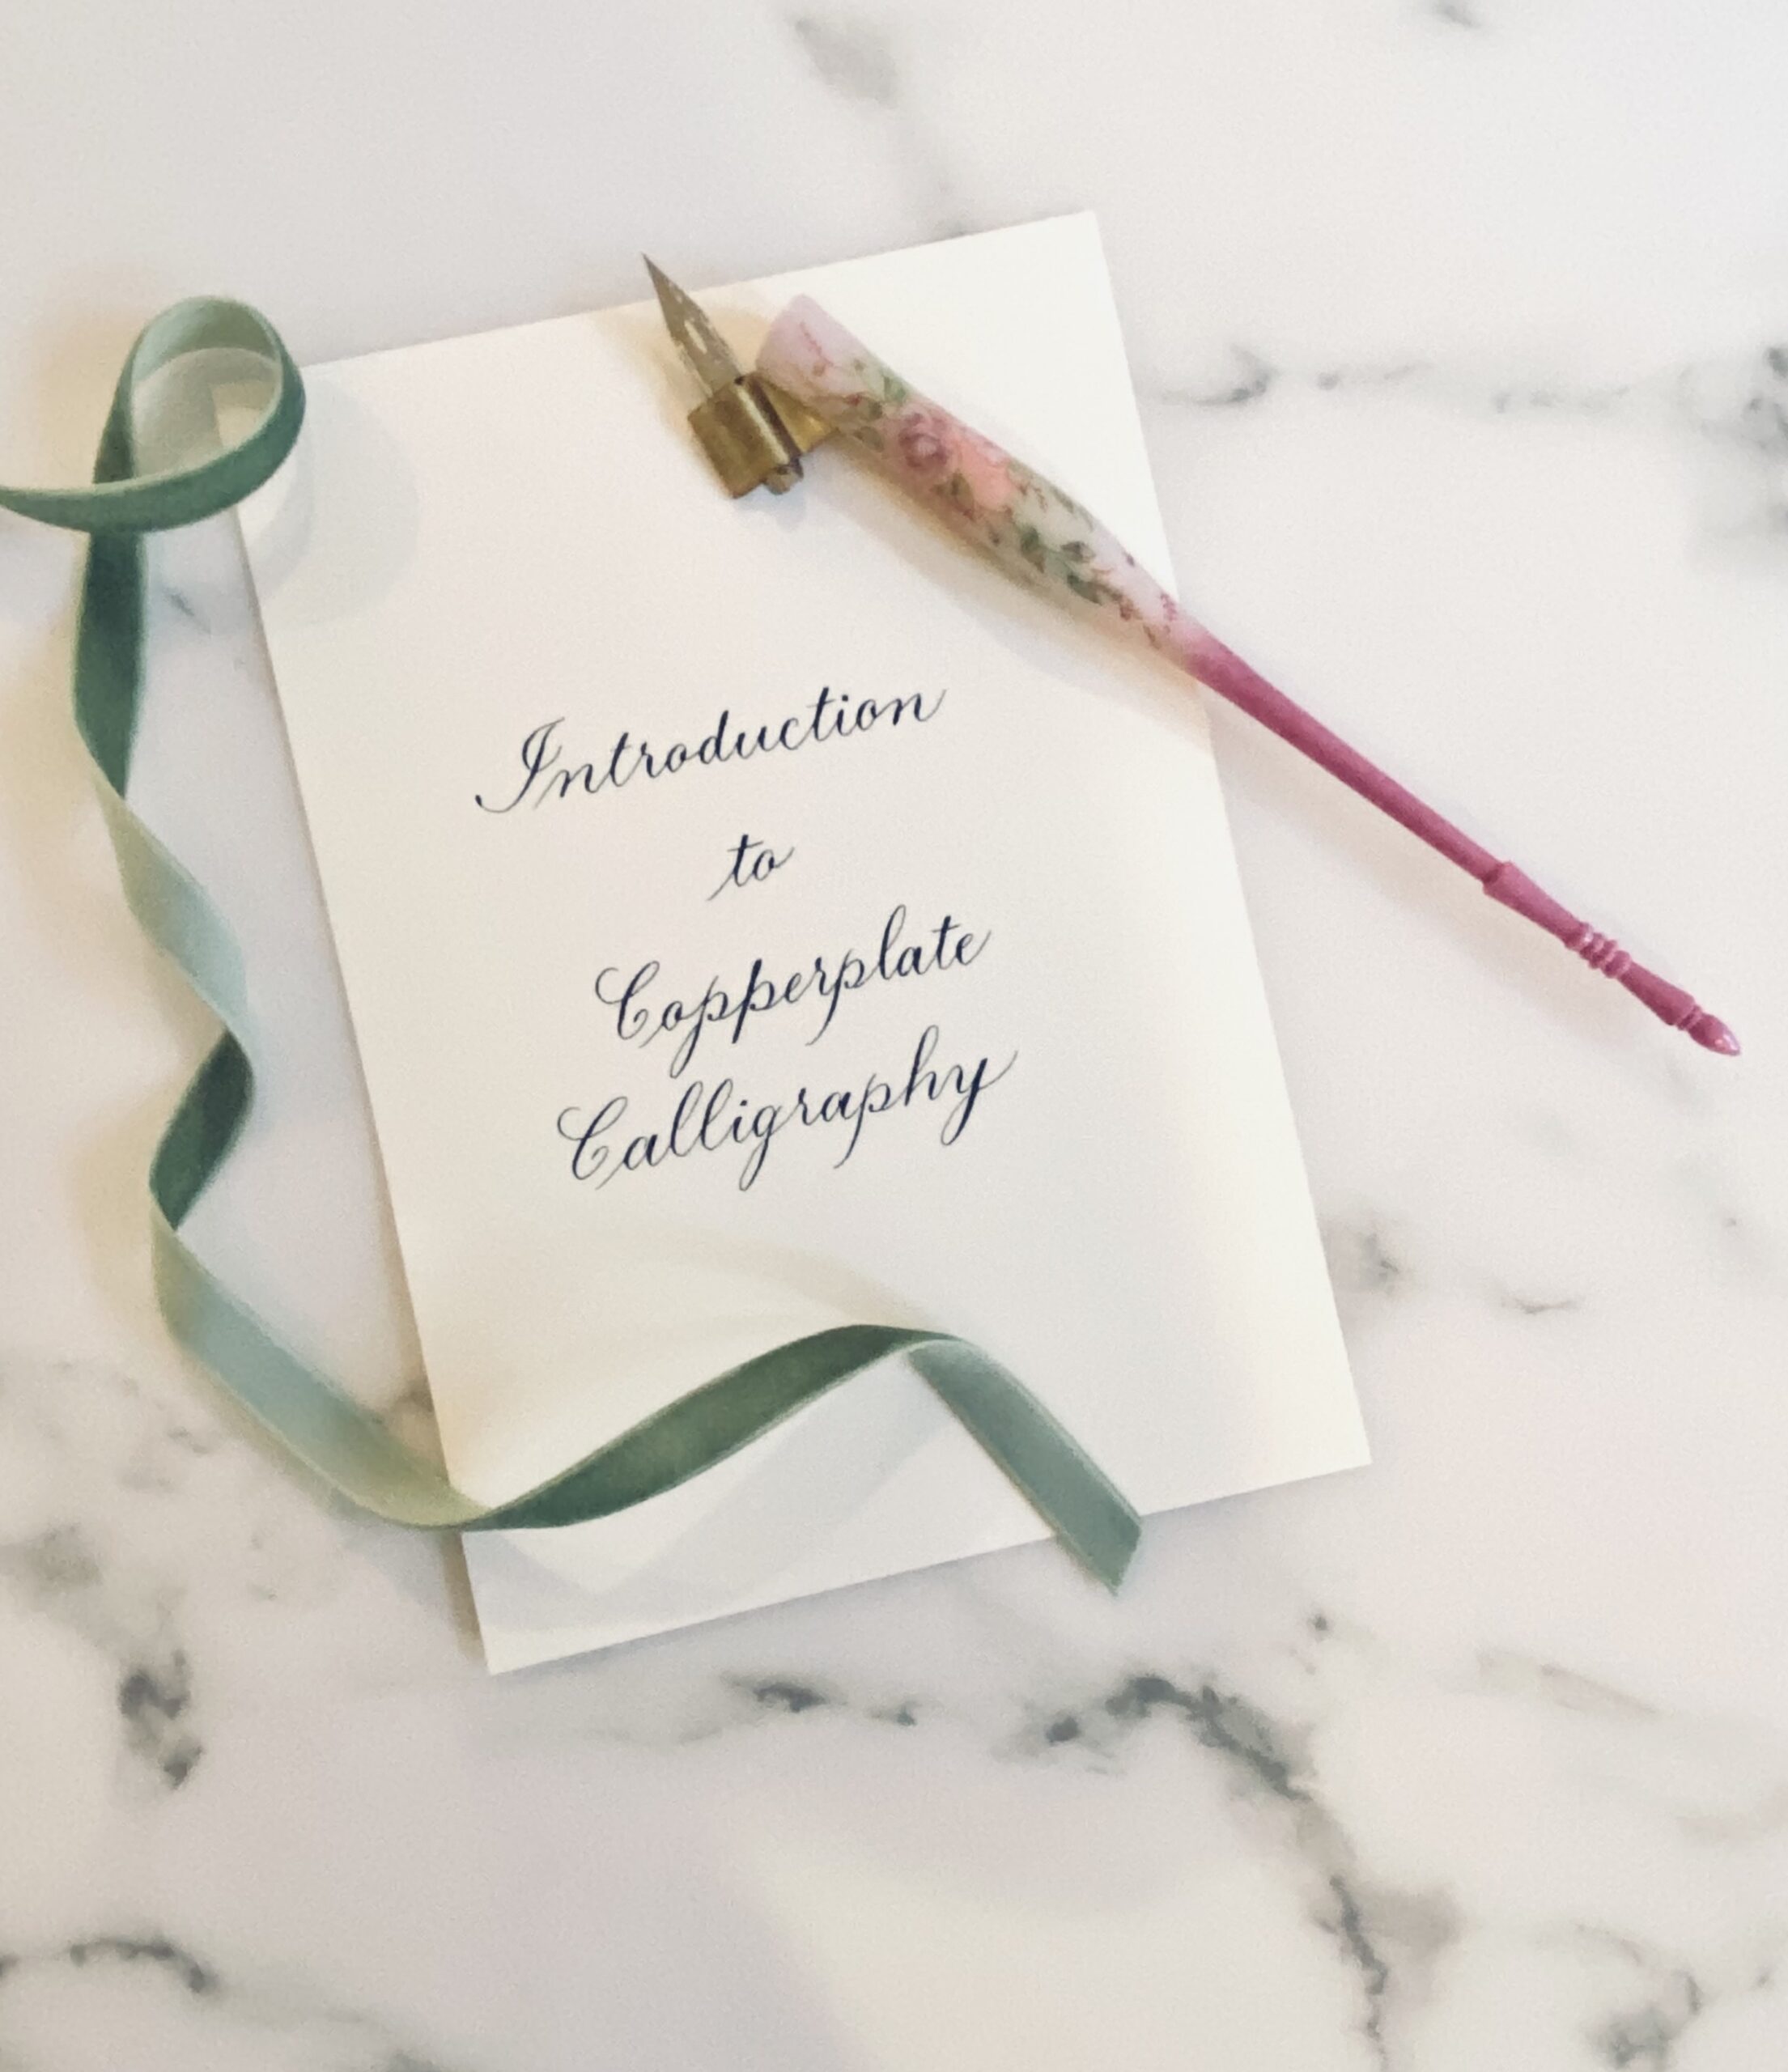 Introduction to Copperplate Calligraphy - Carriage Barn Arts Center